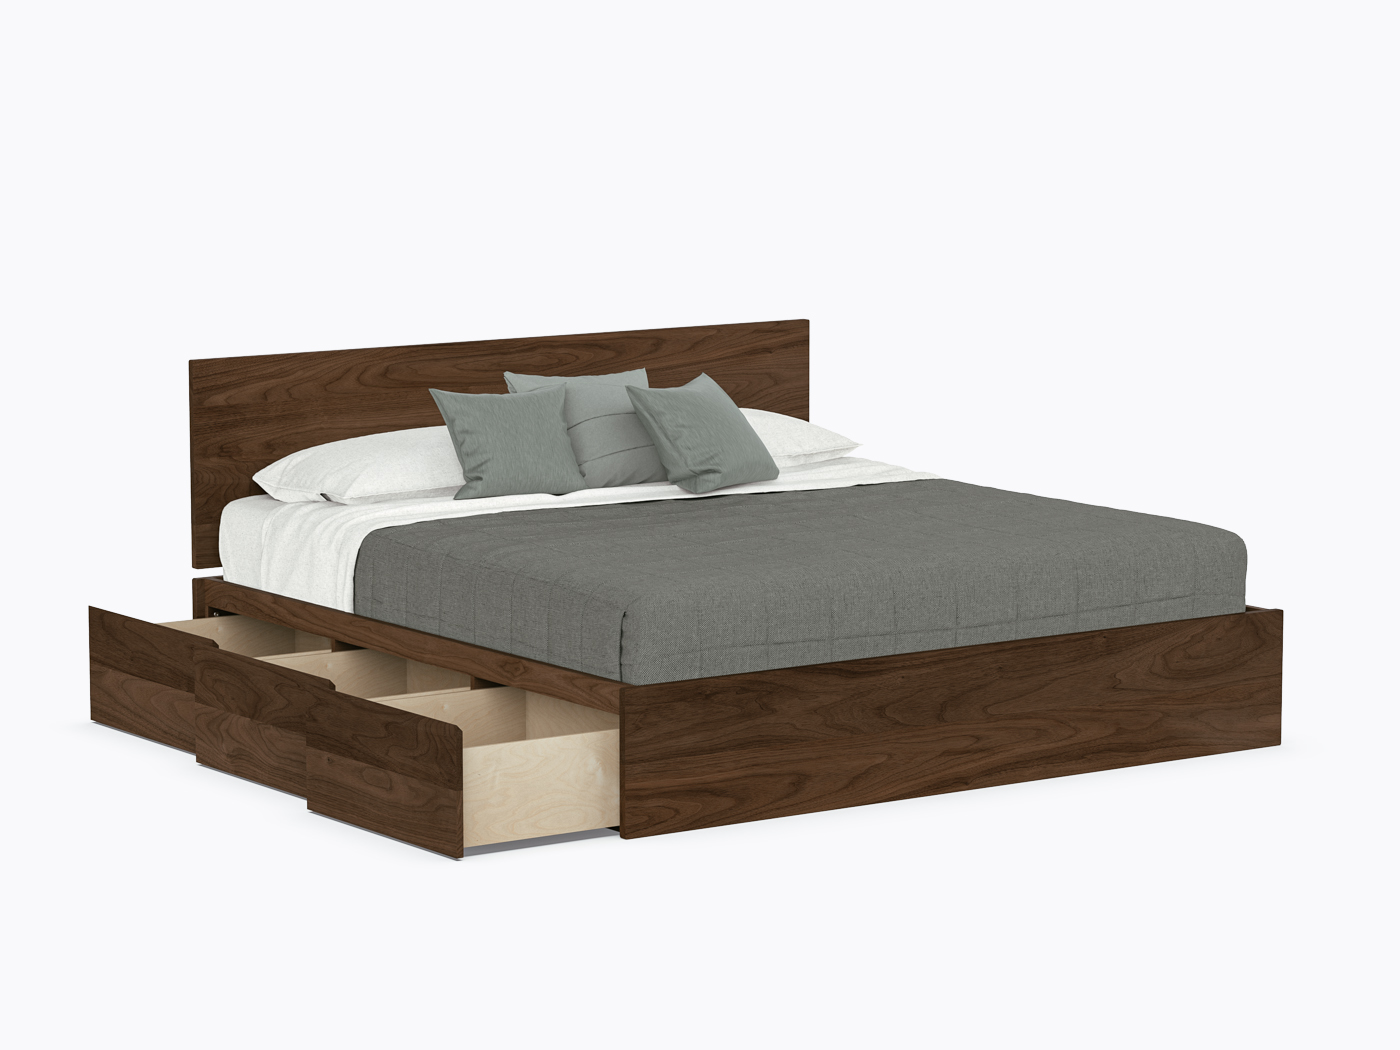 Baxter Bed with drawers - King with headboard - Walnut